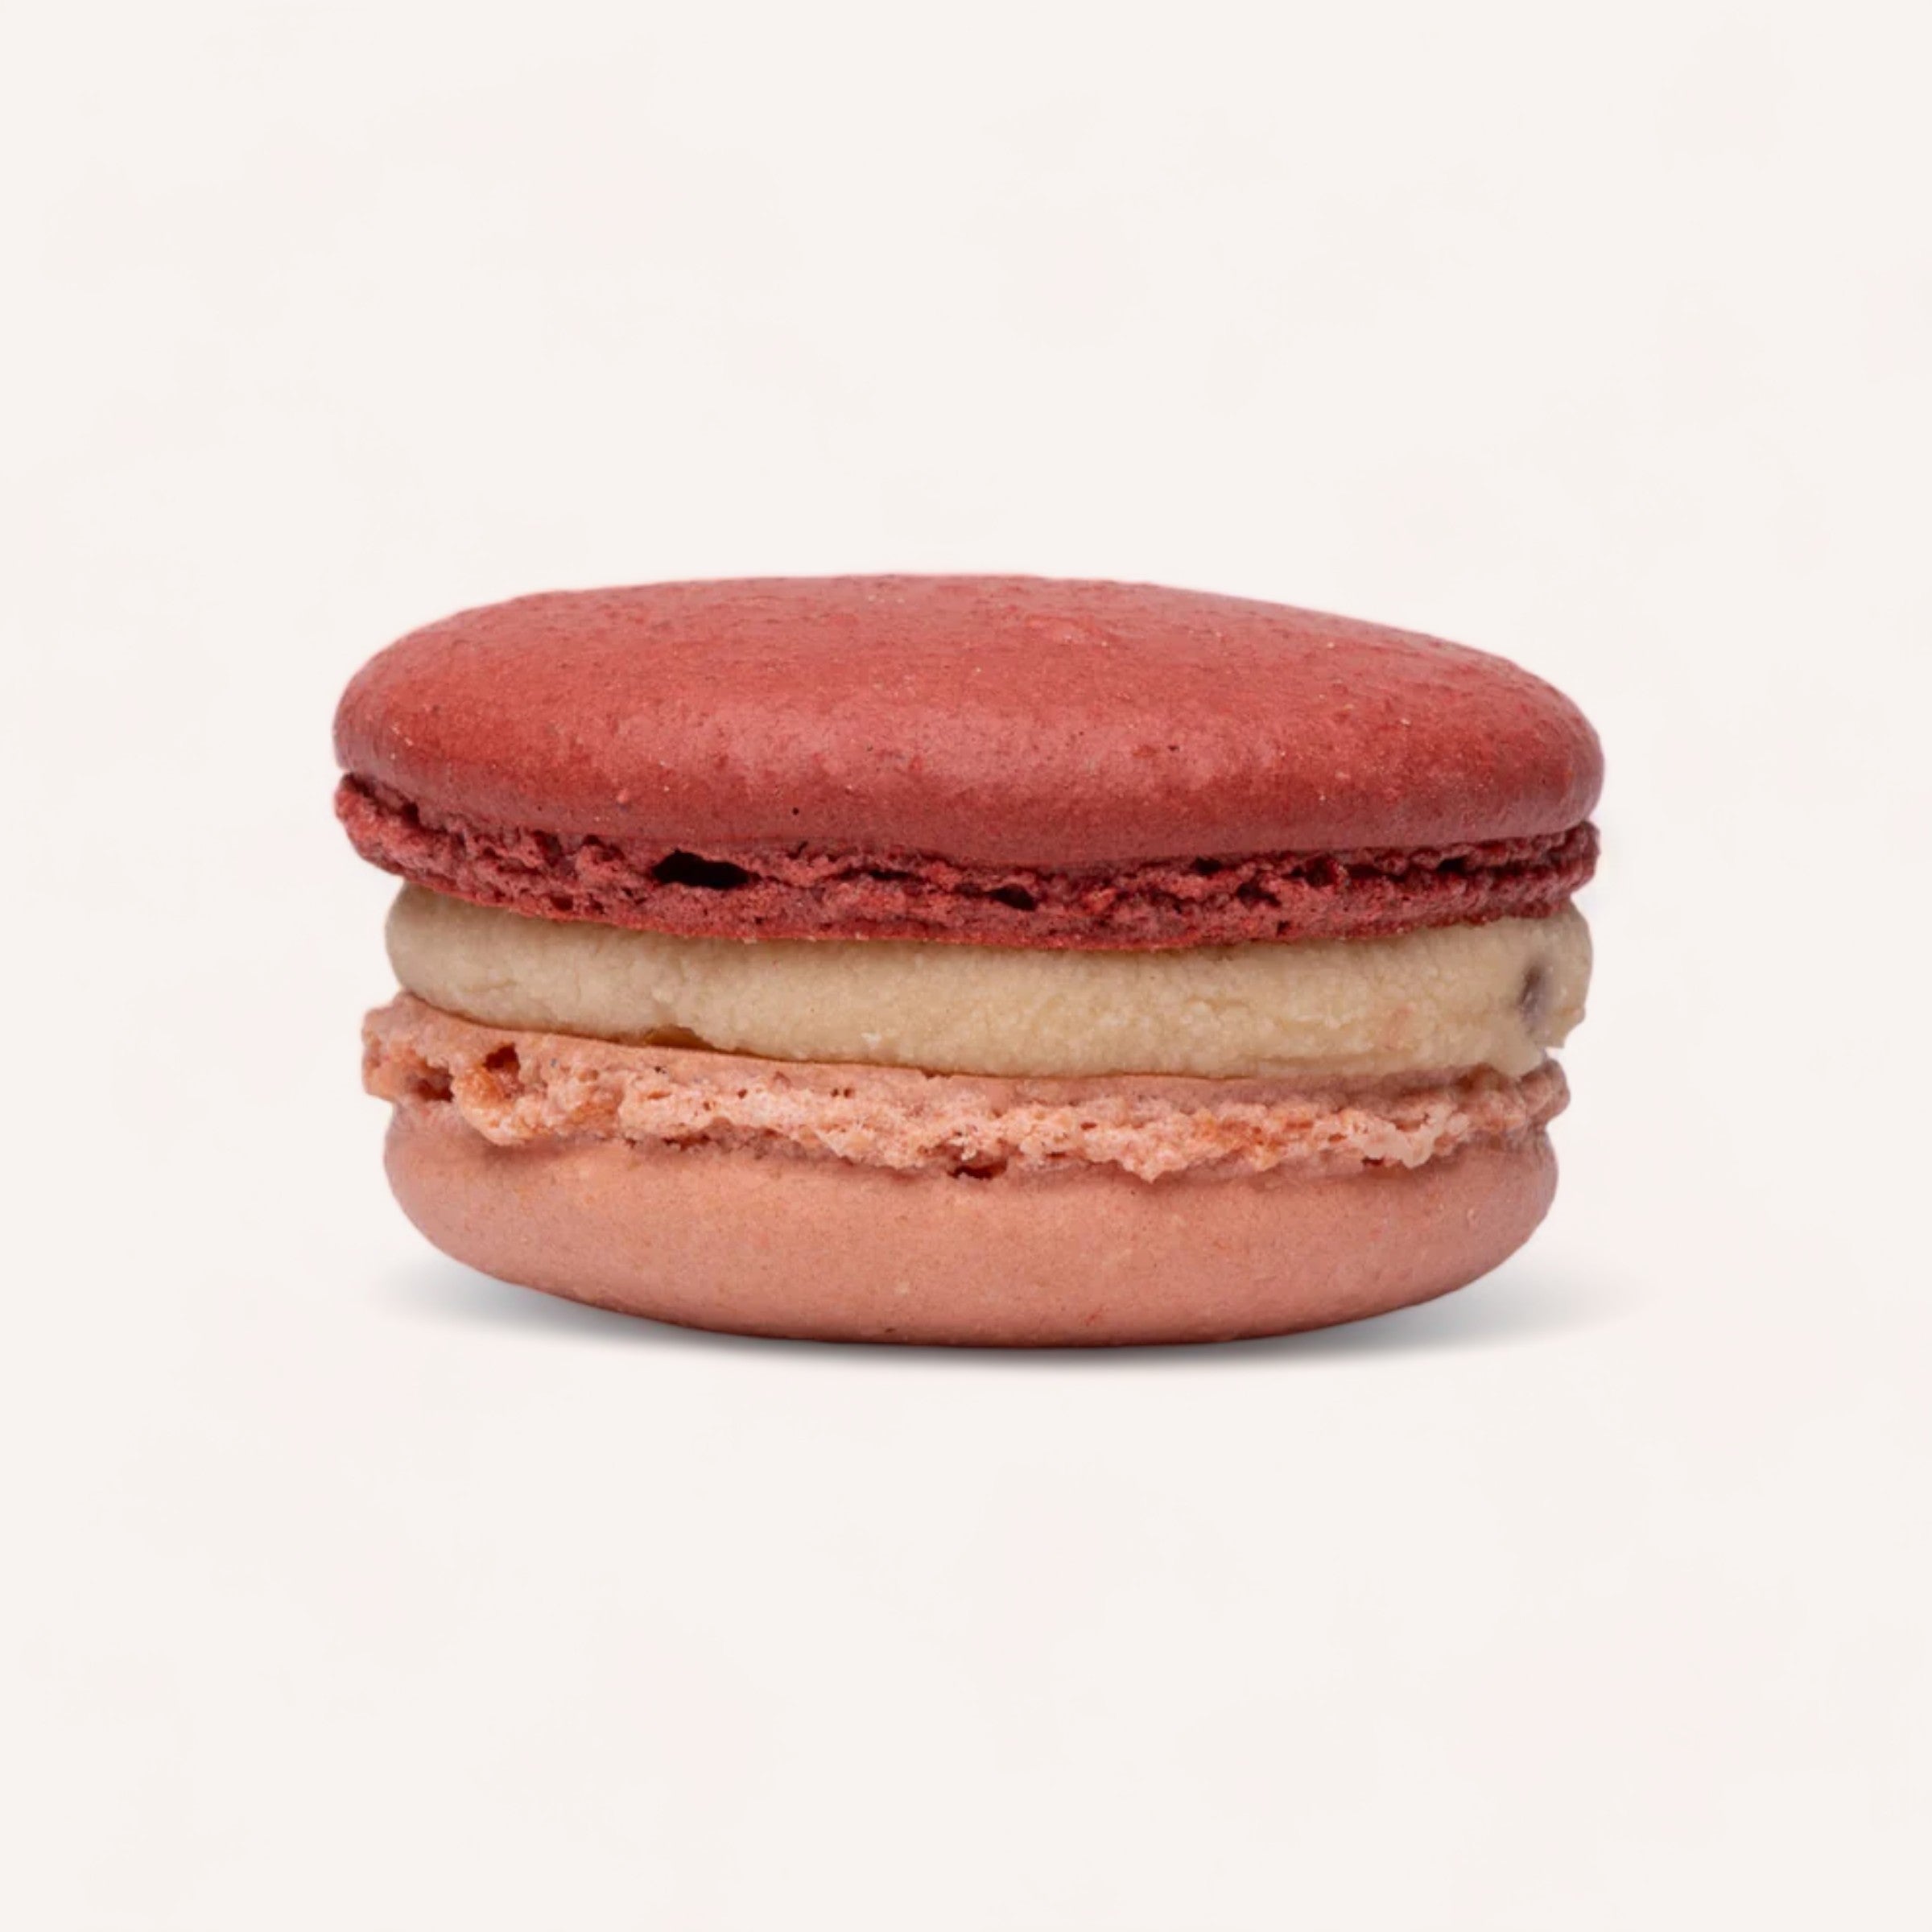 A handmade macaron with a red shell and a creamy filling, depicted against a white background in Christchurch, New Zealand from the Box of 6 Macarons by J'aime les Macarons.